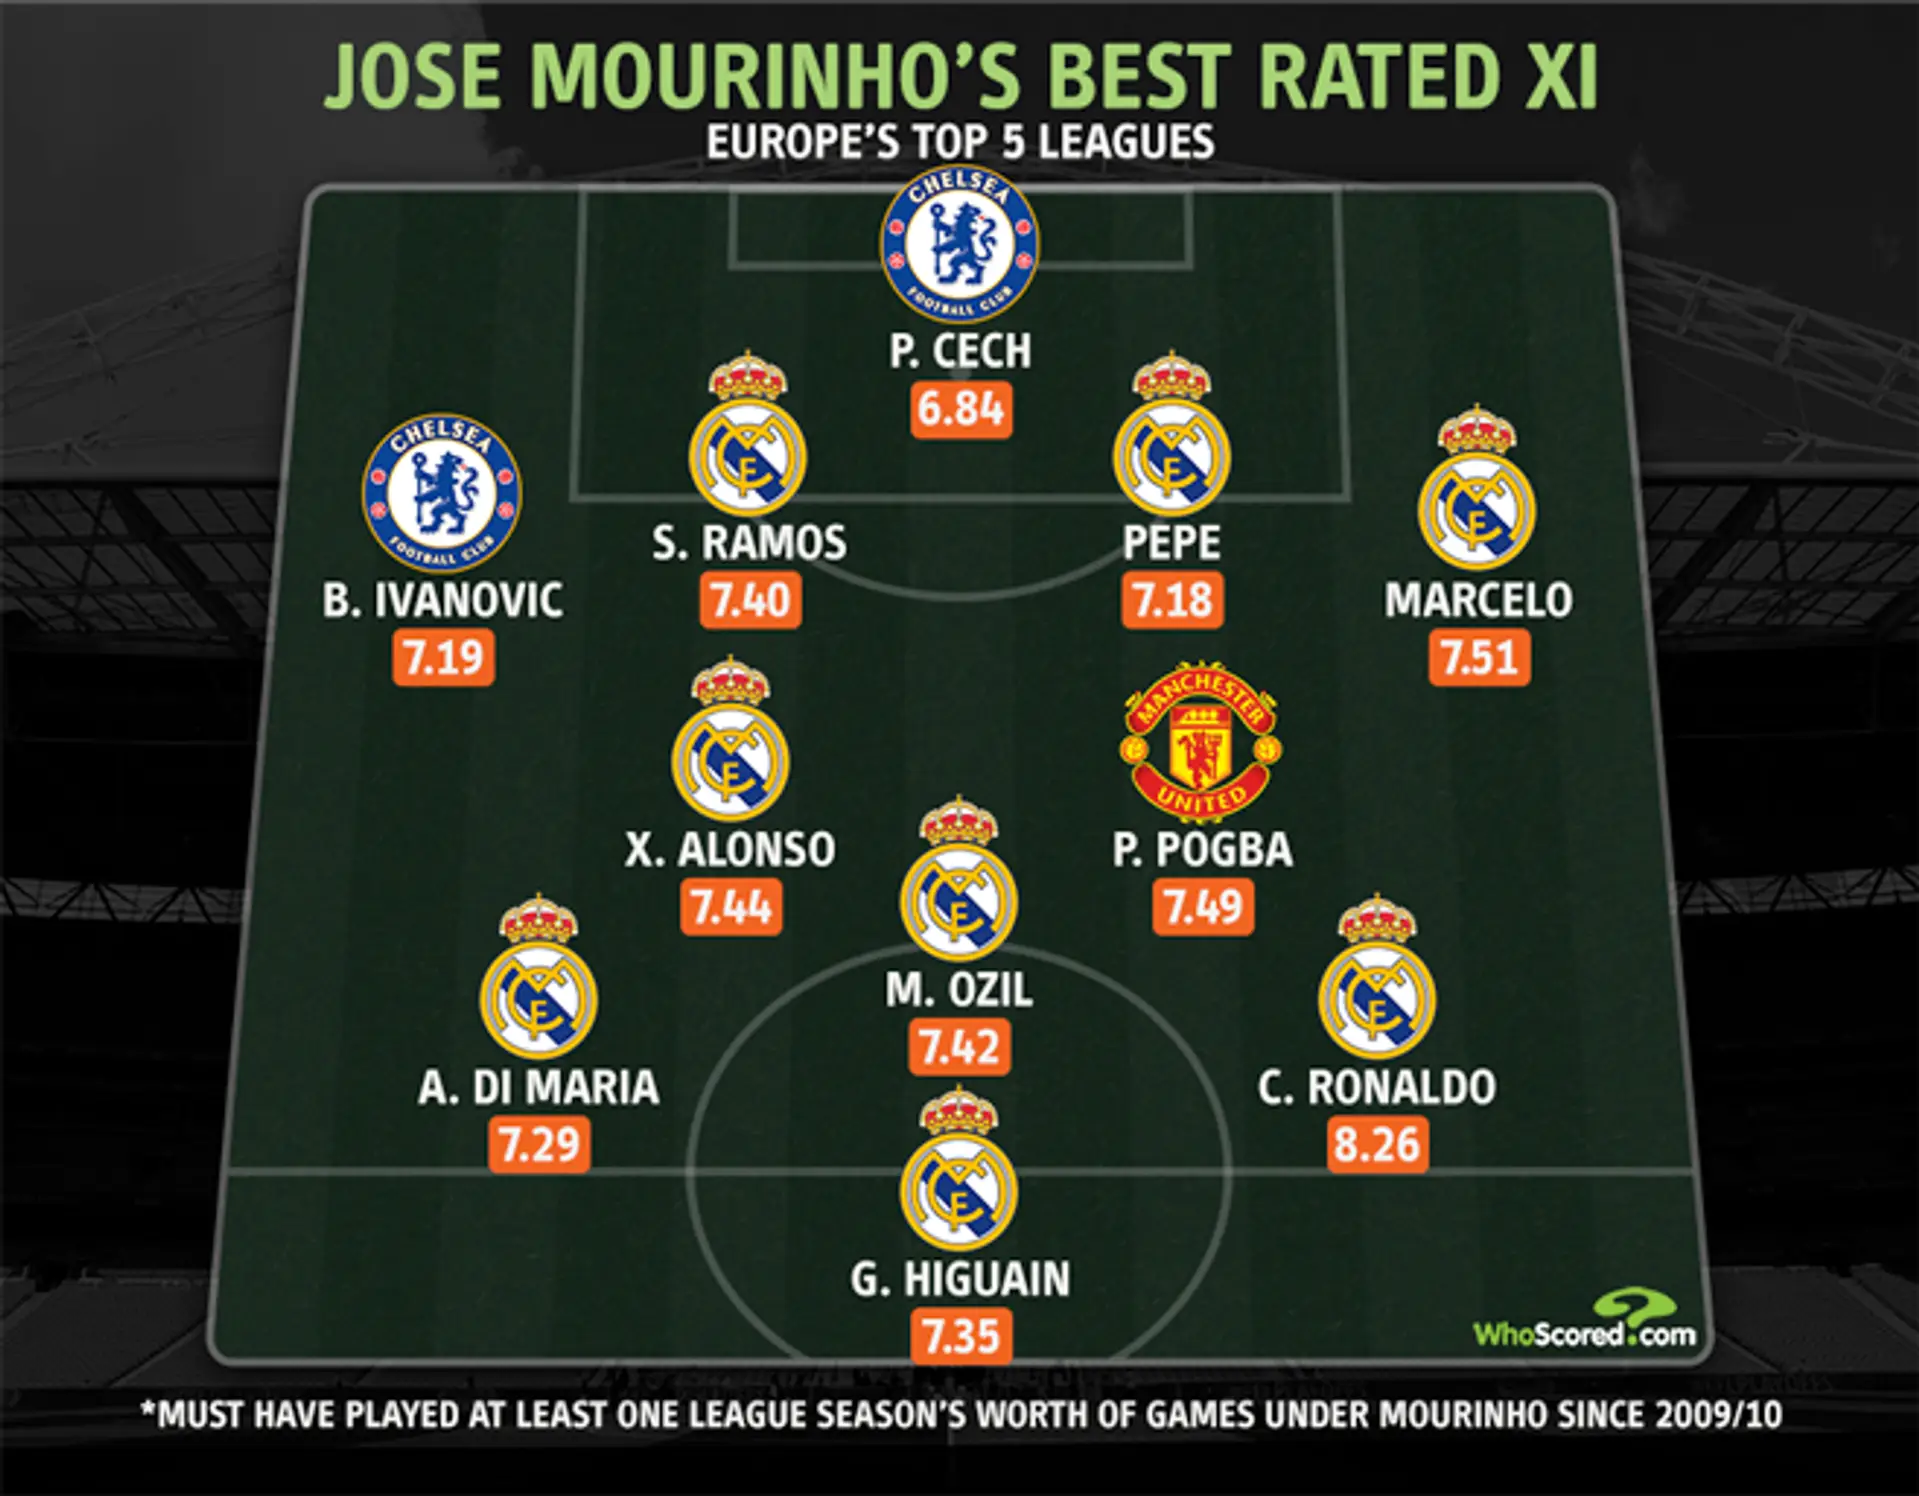 Jose Mourinho's Best Rated XI is sparkling with Real Madrid stars!